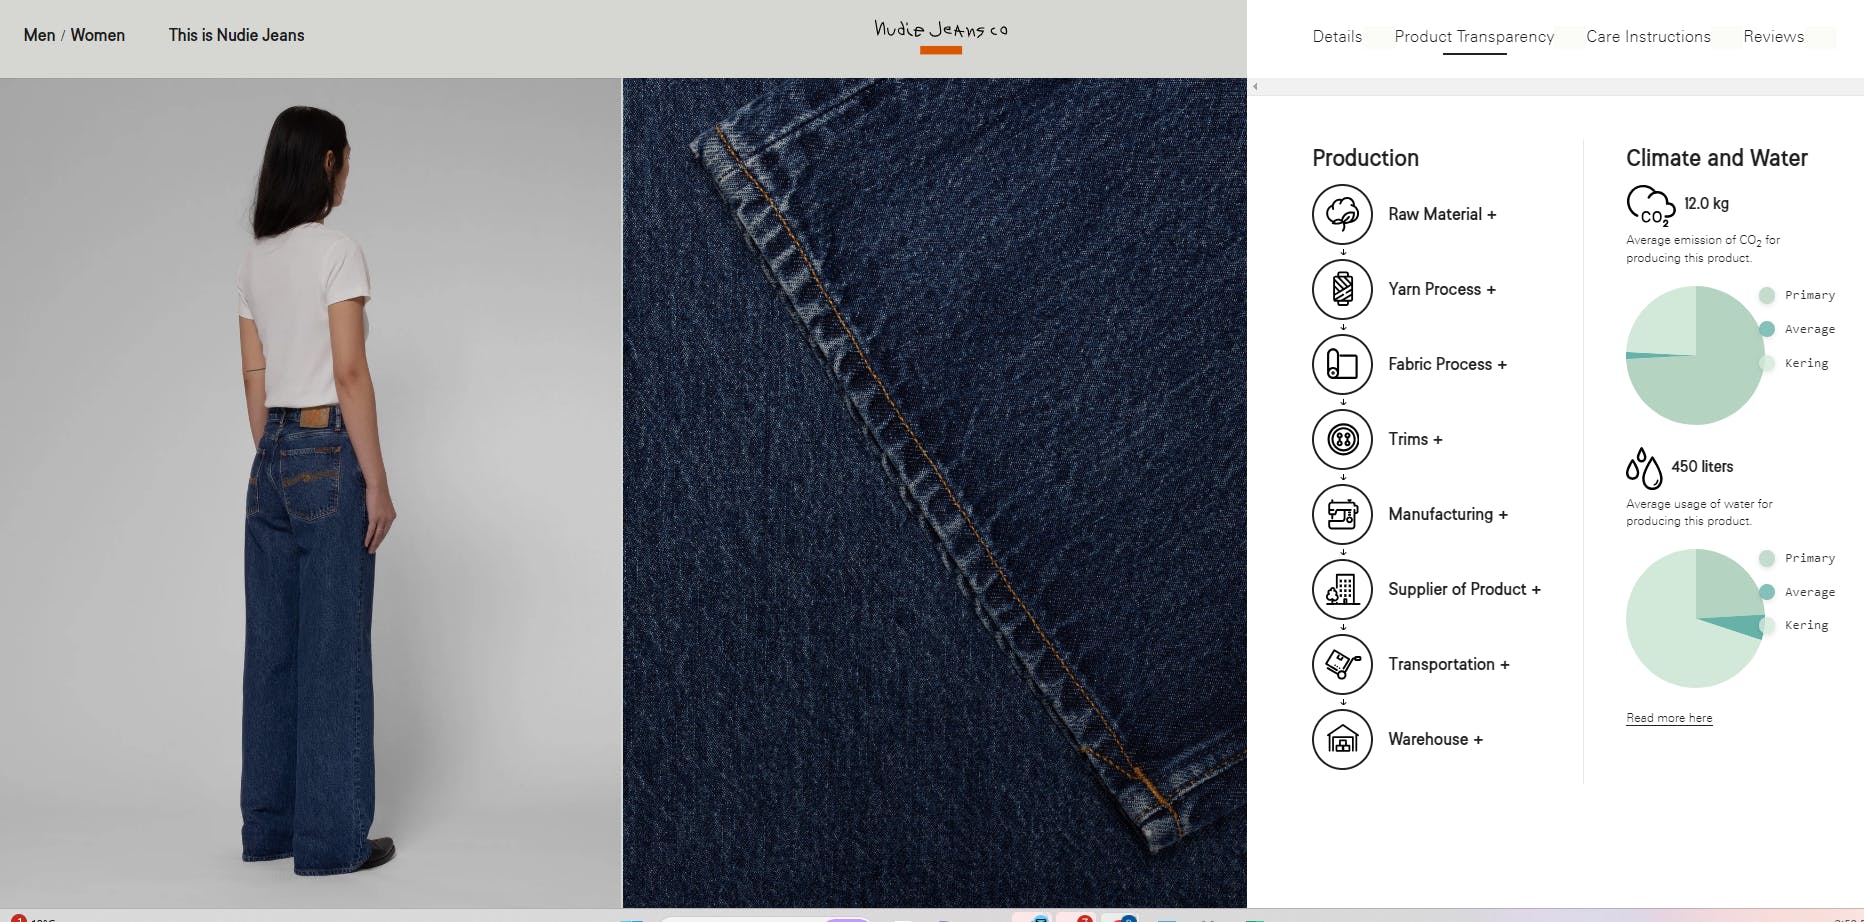 Nudie Jeans sustainable business practices